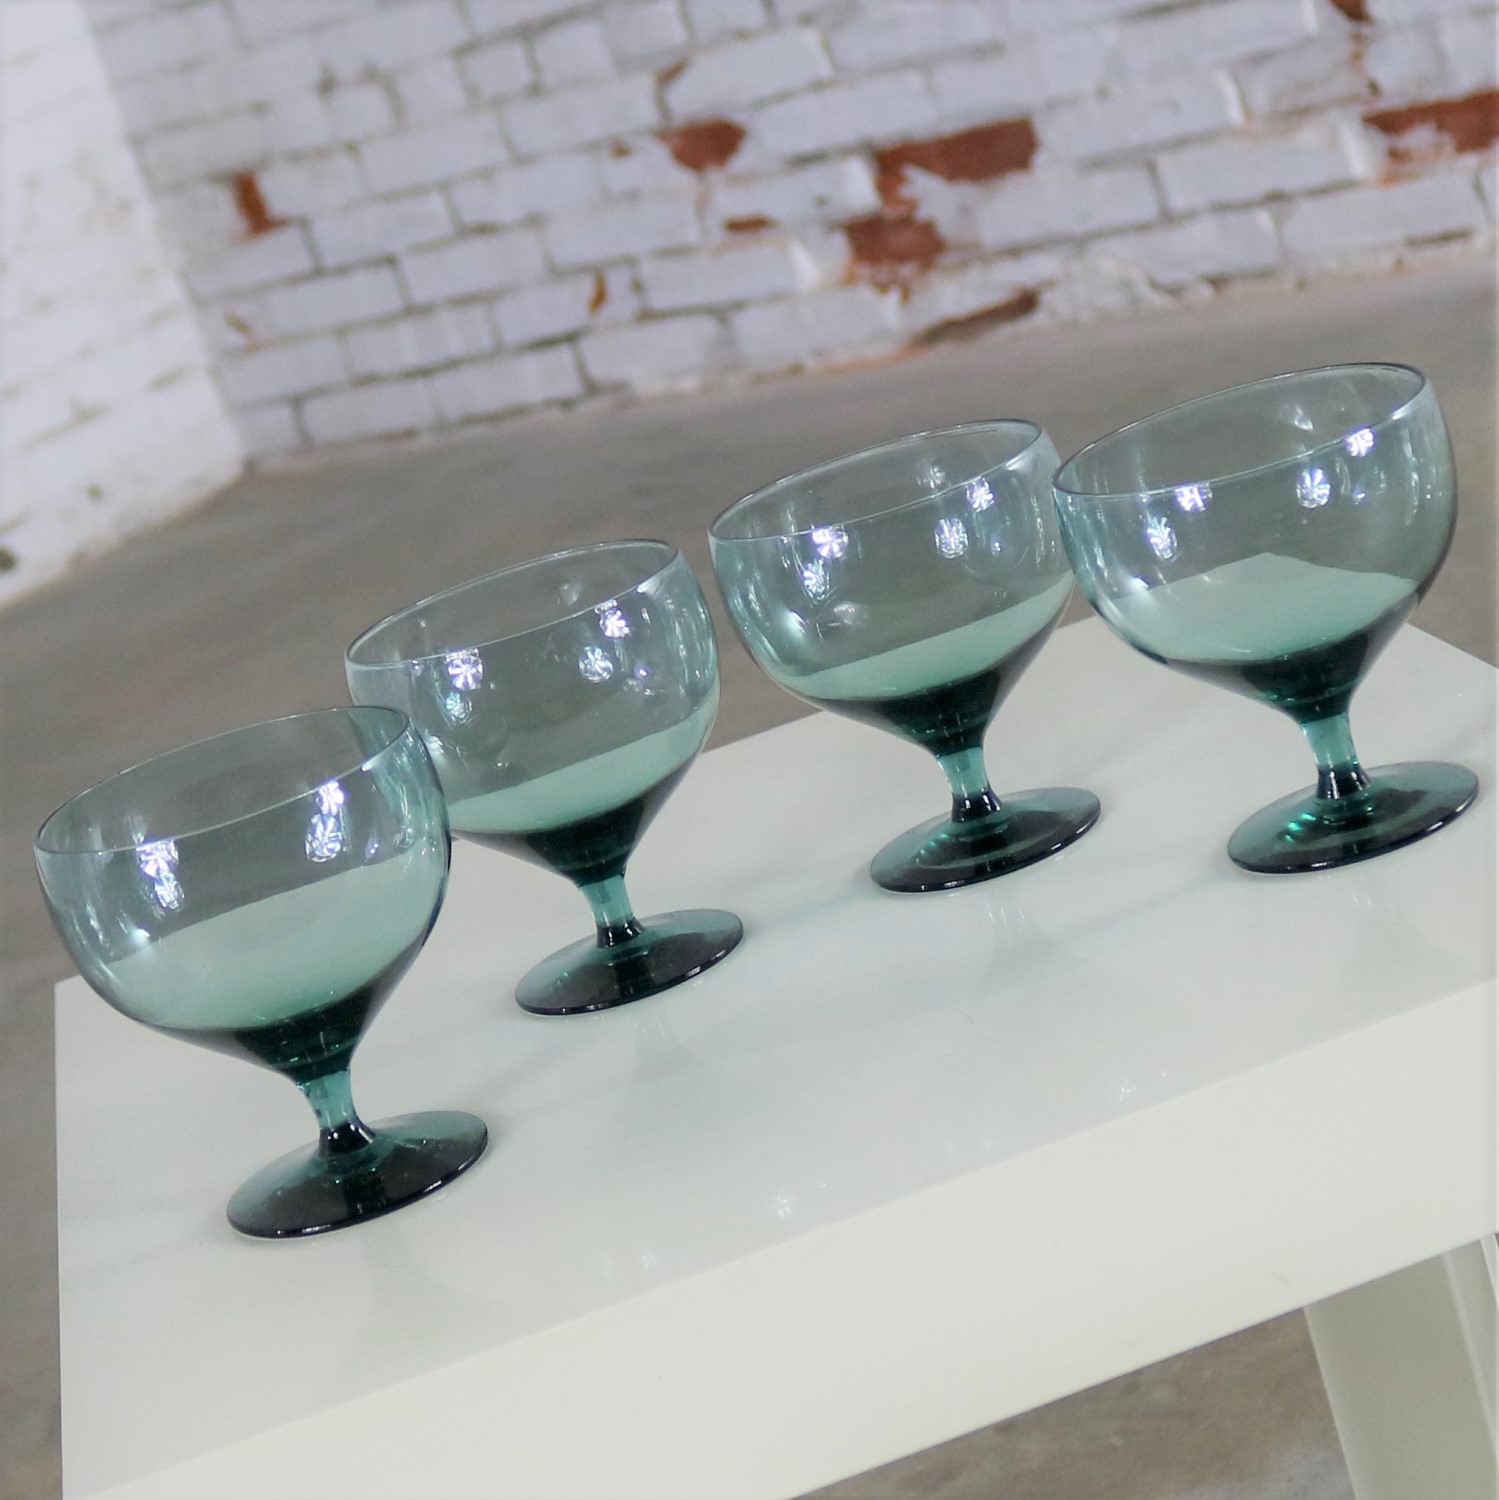 Collection of Morgantown American Modern Glassware by Russel Wright at  1stDibs